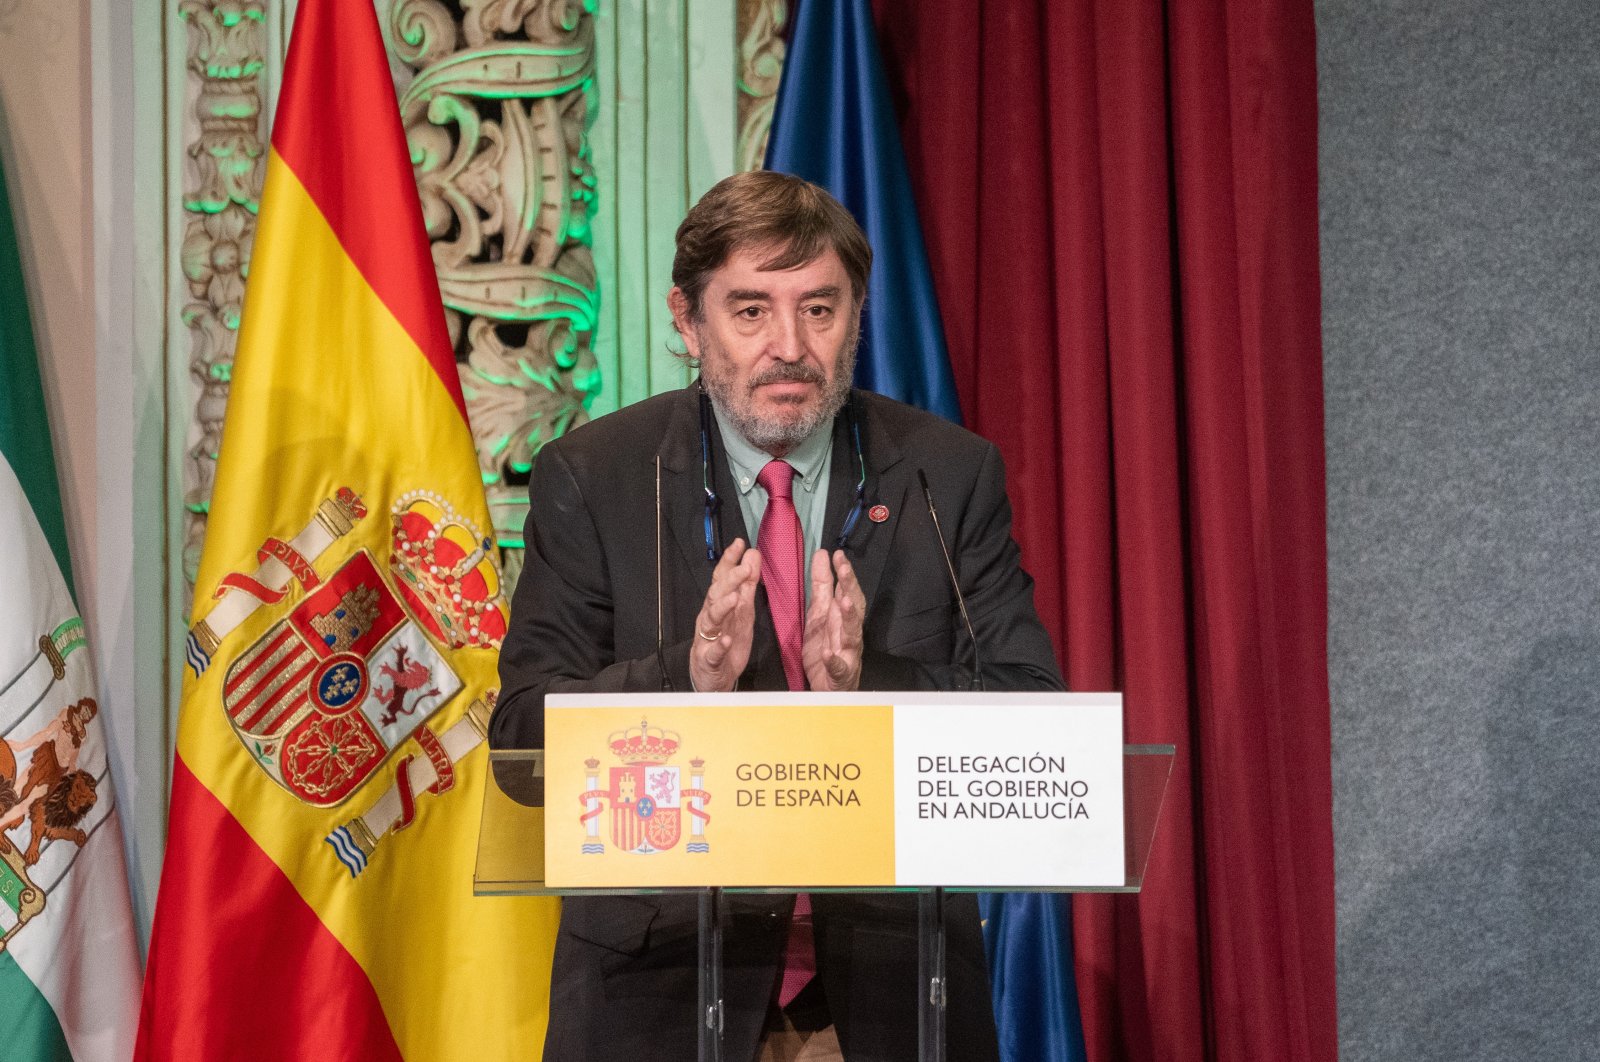 The director of the Cervantes Institute, Luis Garcia Montero, speaks at a ceremony in Seville, Spain, Dec. 20, 2022. (Getty Images Photo)